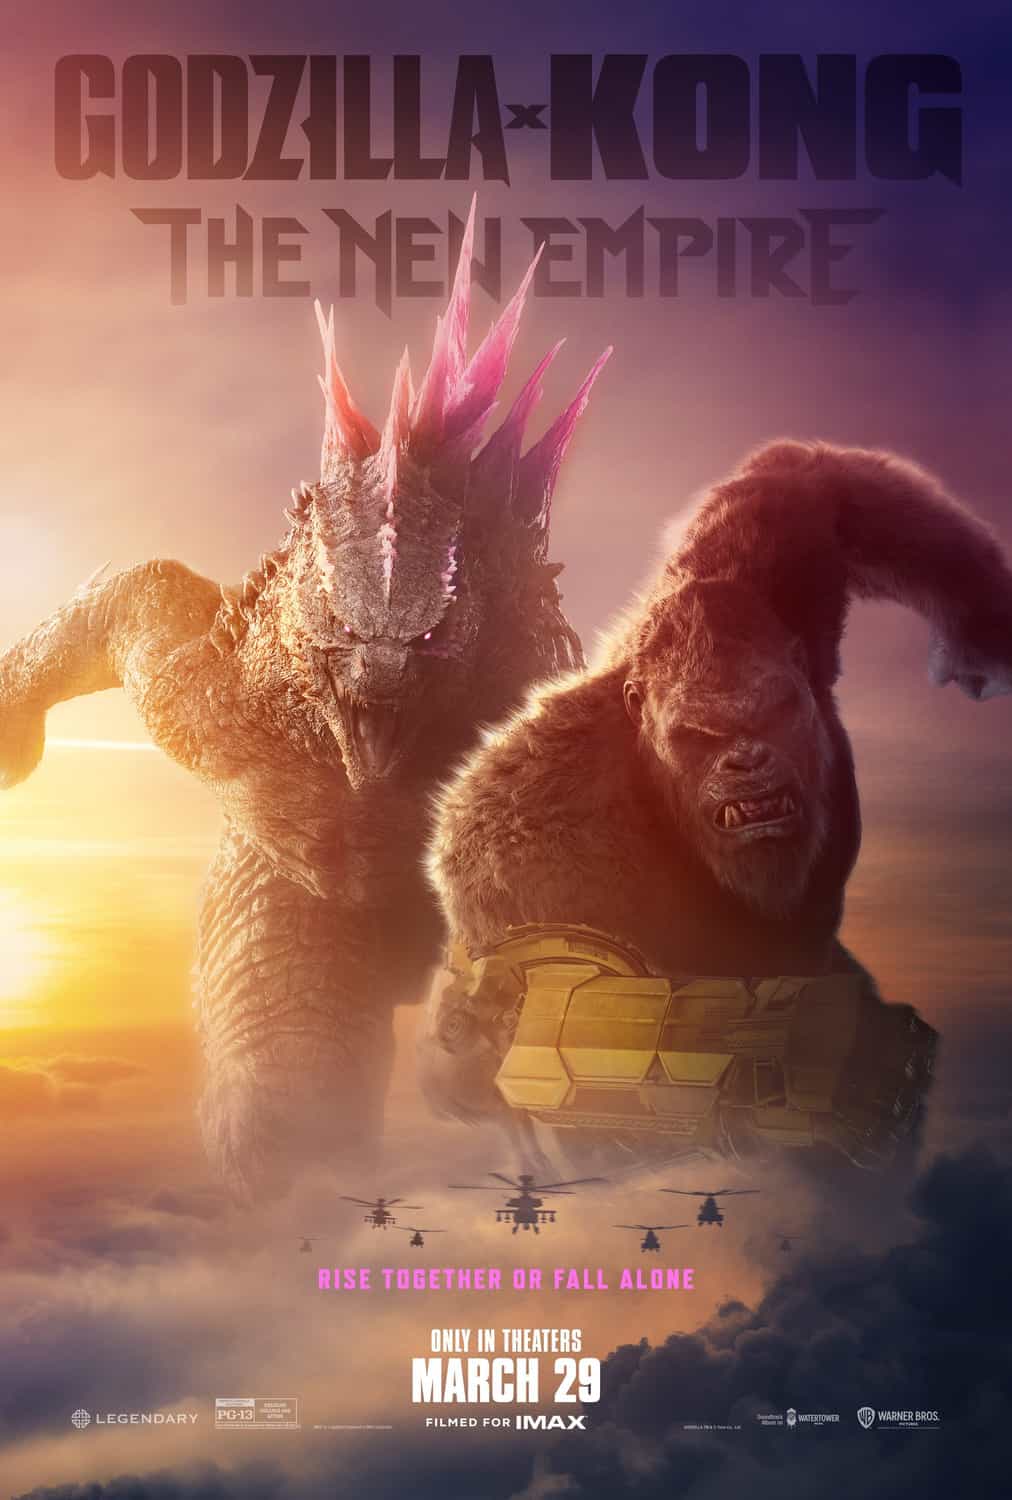 Global Box Office Weekend Report 29th - 31st March 2024:  Godzilla X Kong: The New Empire makes its debut at the top of the global box office with nearly $200 Million